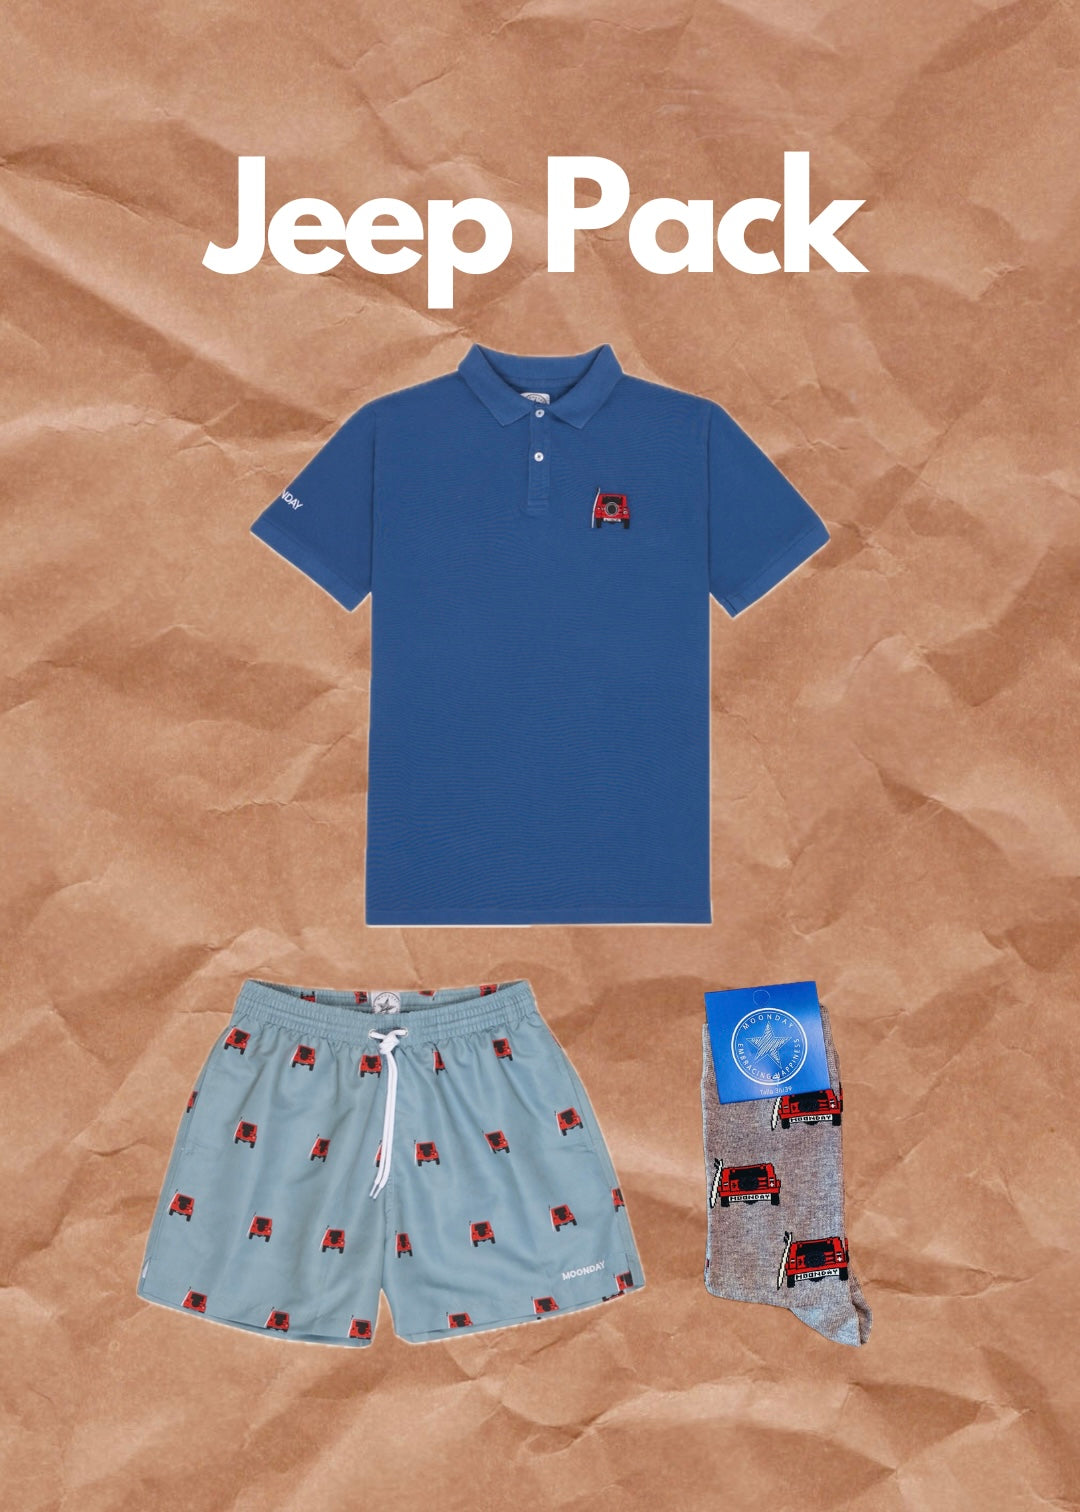 Jeep Pack